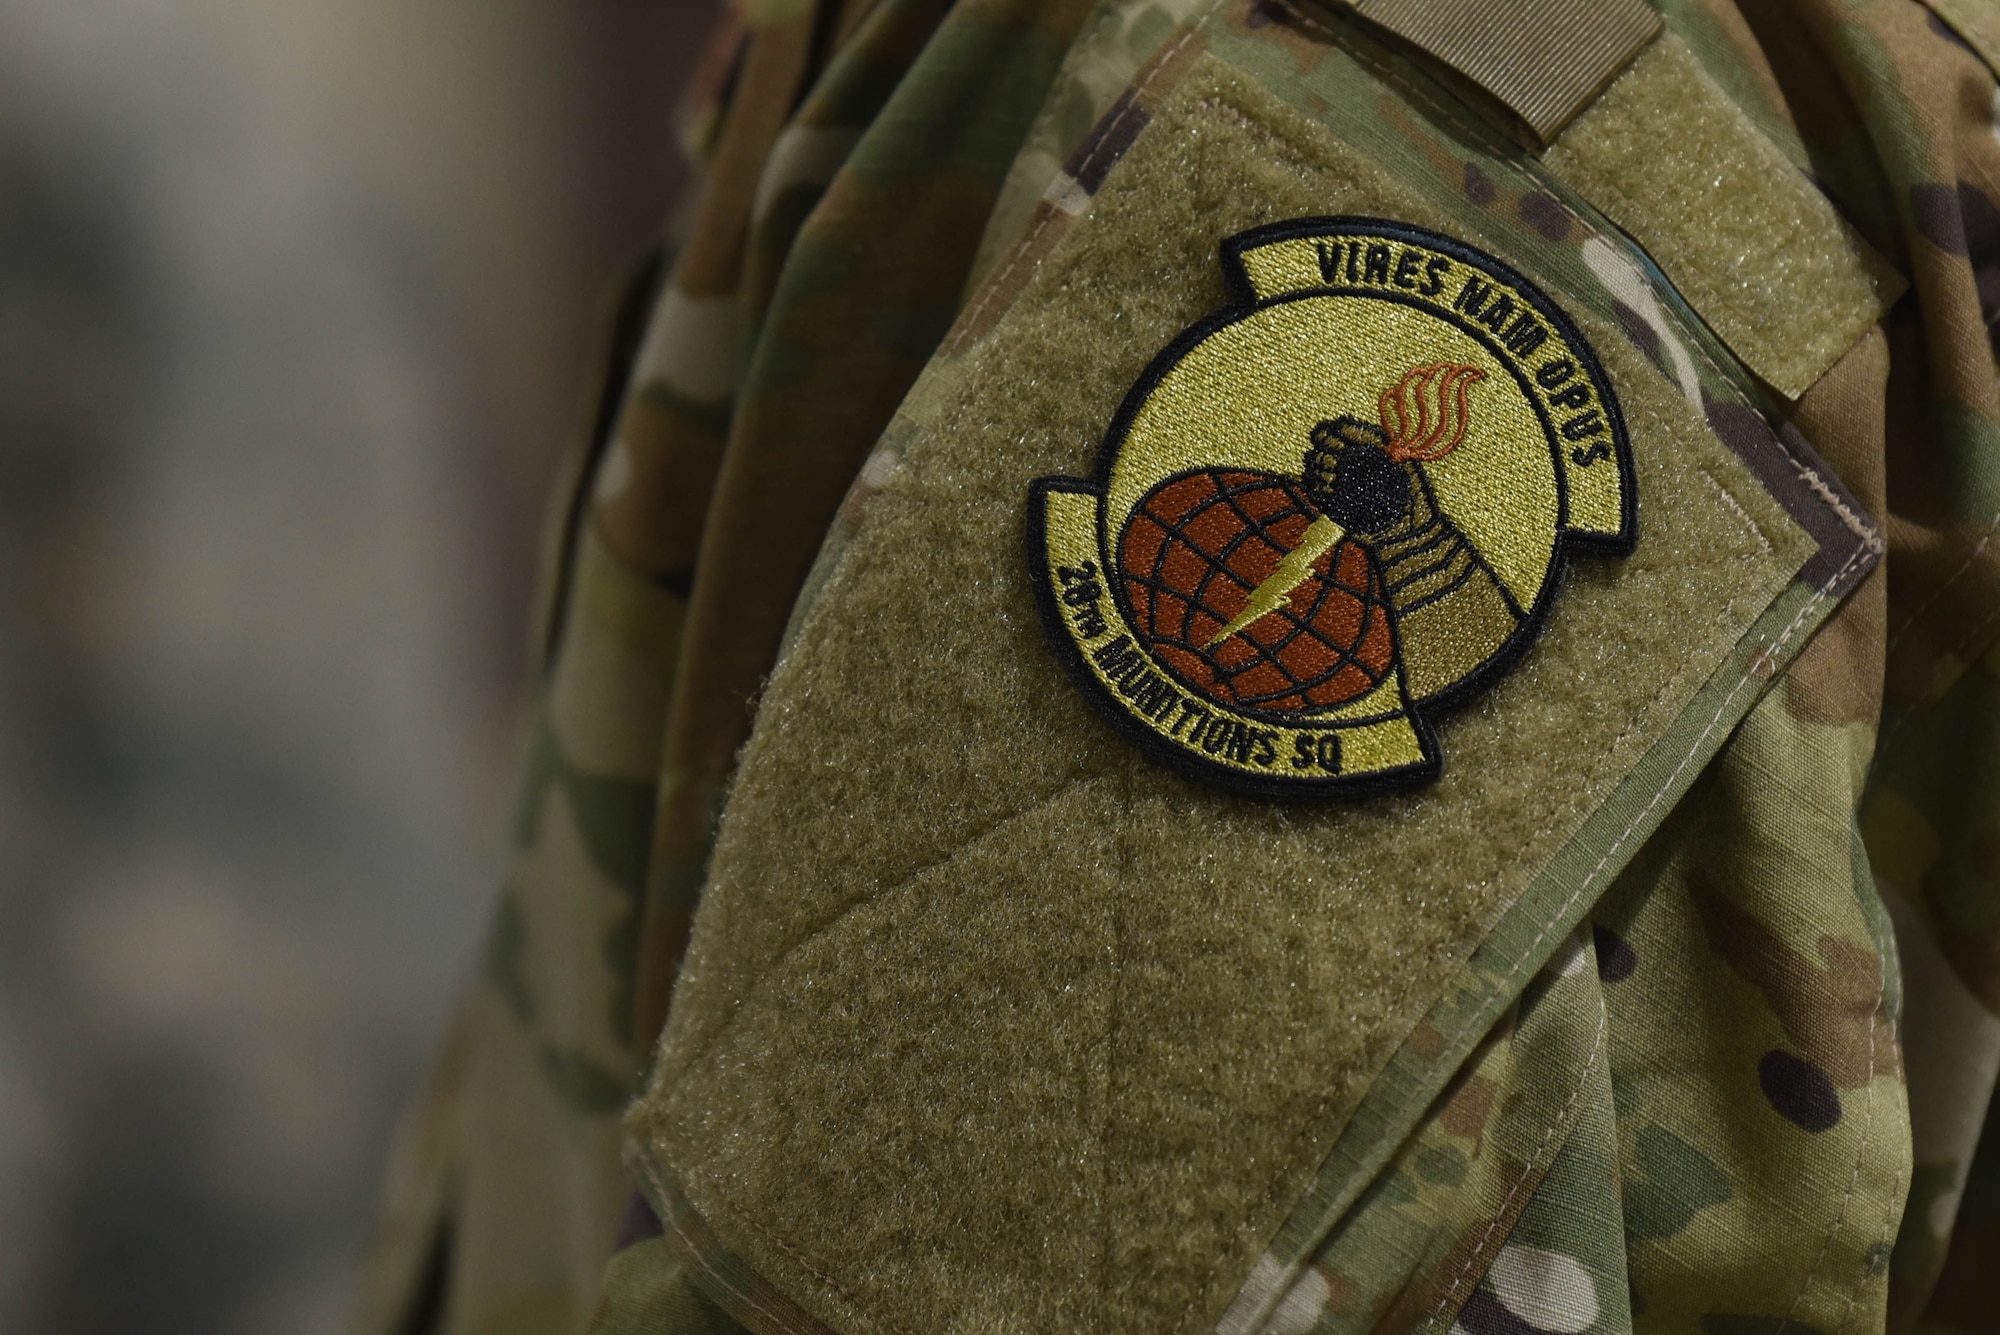 The patch of the 28th Munitions Squadron is proudly worn by a Raider Airman during a qualifying round for the second annual Air Force Combat Operations Competition on Ellsworth Air Force Base, S.D., Feb. 5, 2019. The competition is Air Force-wide and is used to determine the best of the best in munitions operations. (U.S. Air Force photo by Airman John Ennis)